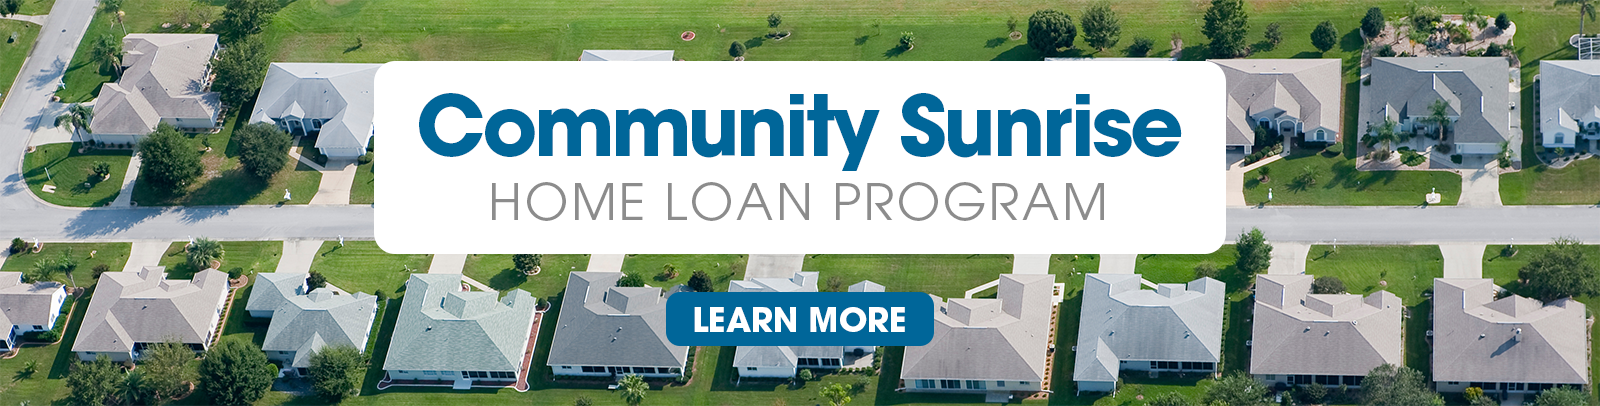 Sunrise home loan program with learn more button over newly developed suburban neighborhood